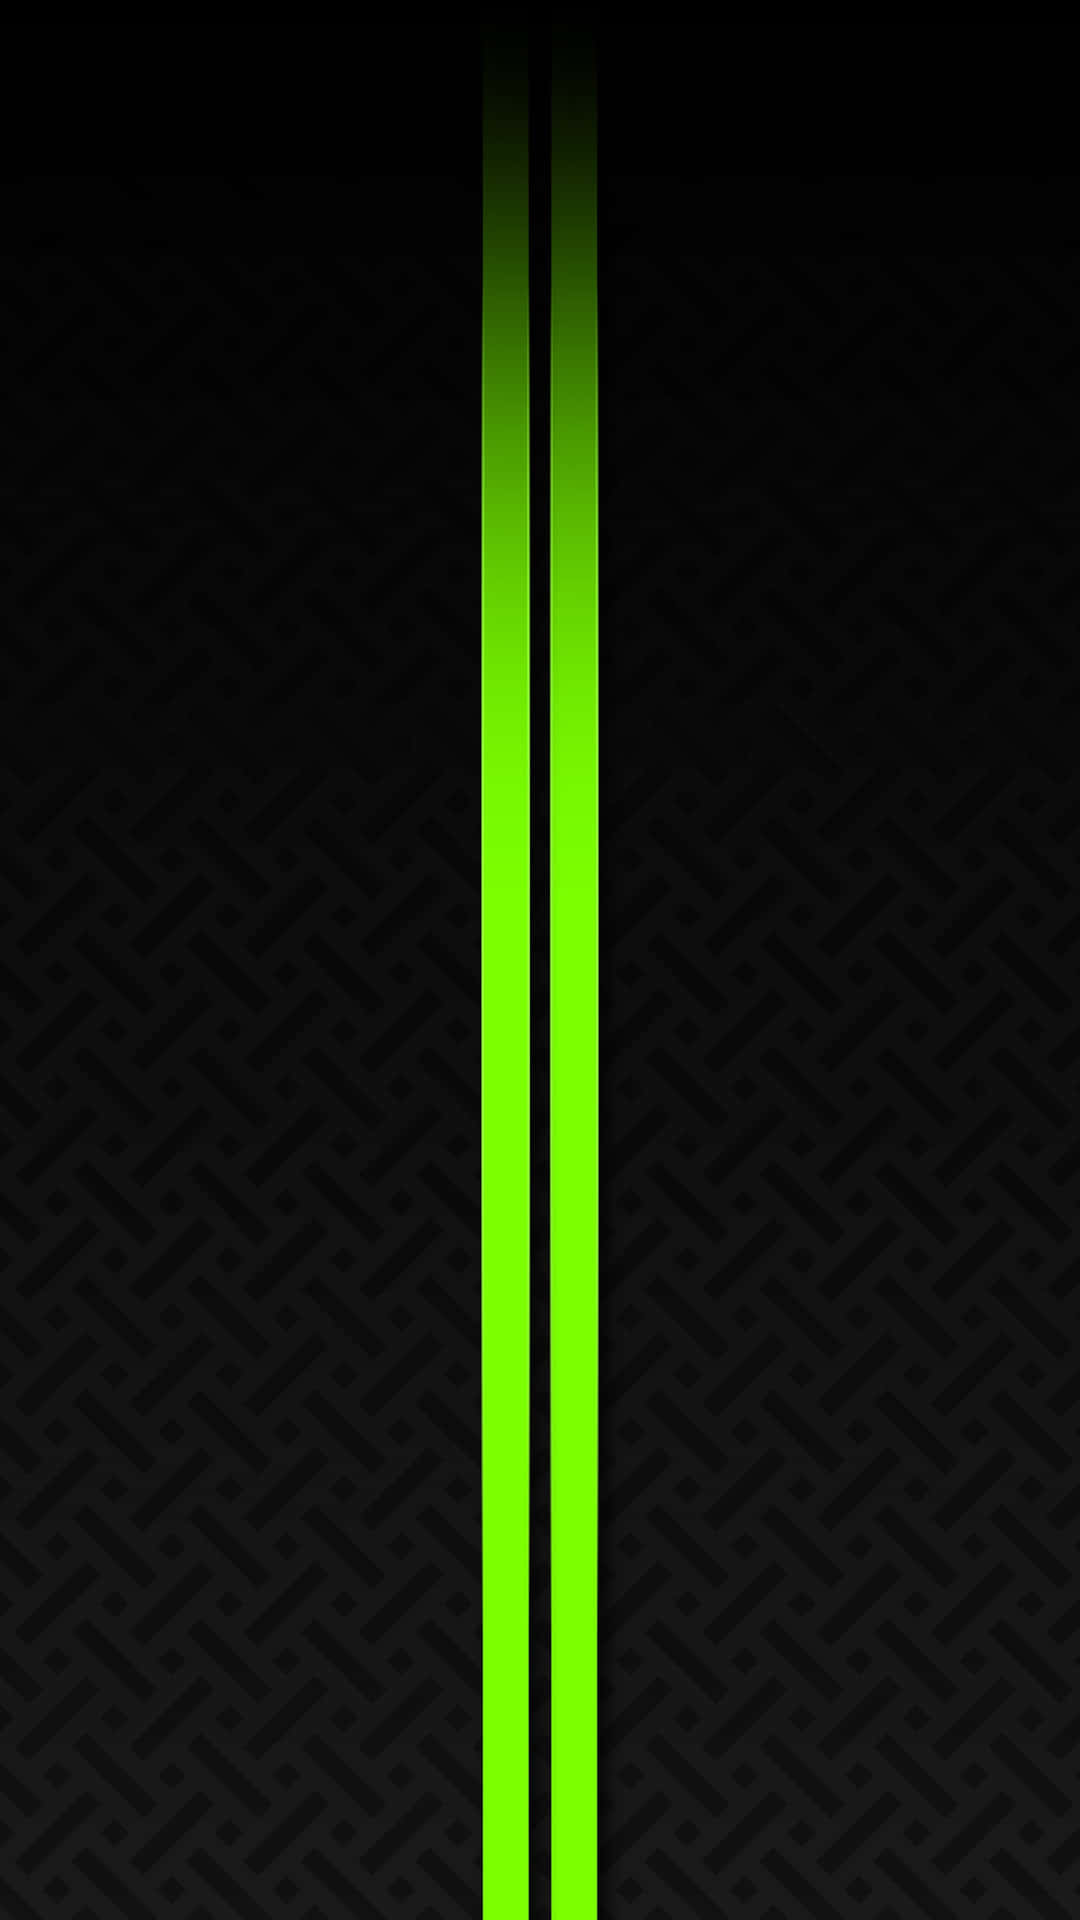 A Green Neon Line On A Black Background Wallpaper